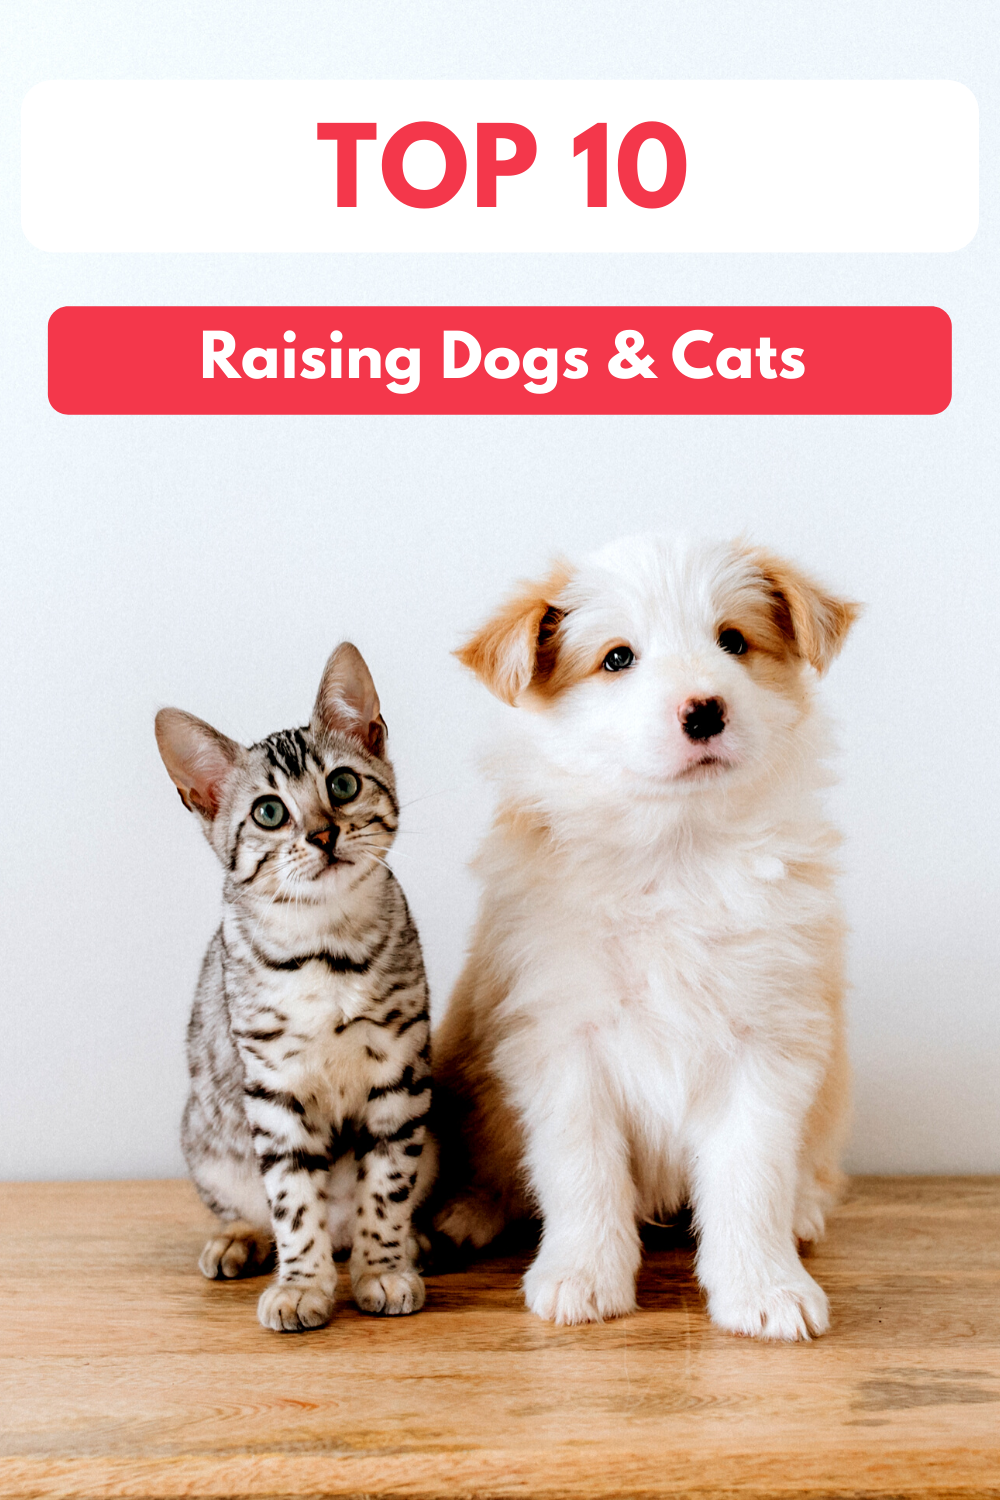 Top 10 Tips for Raising Dogs and Cats Together | Dogs and Cats Living Together in Harmony (Early access for our Patreon community)